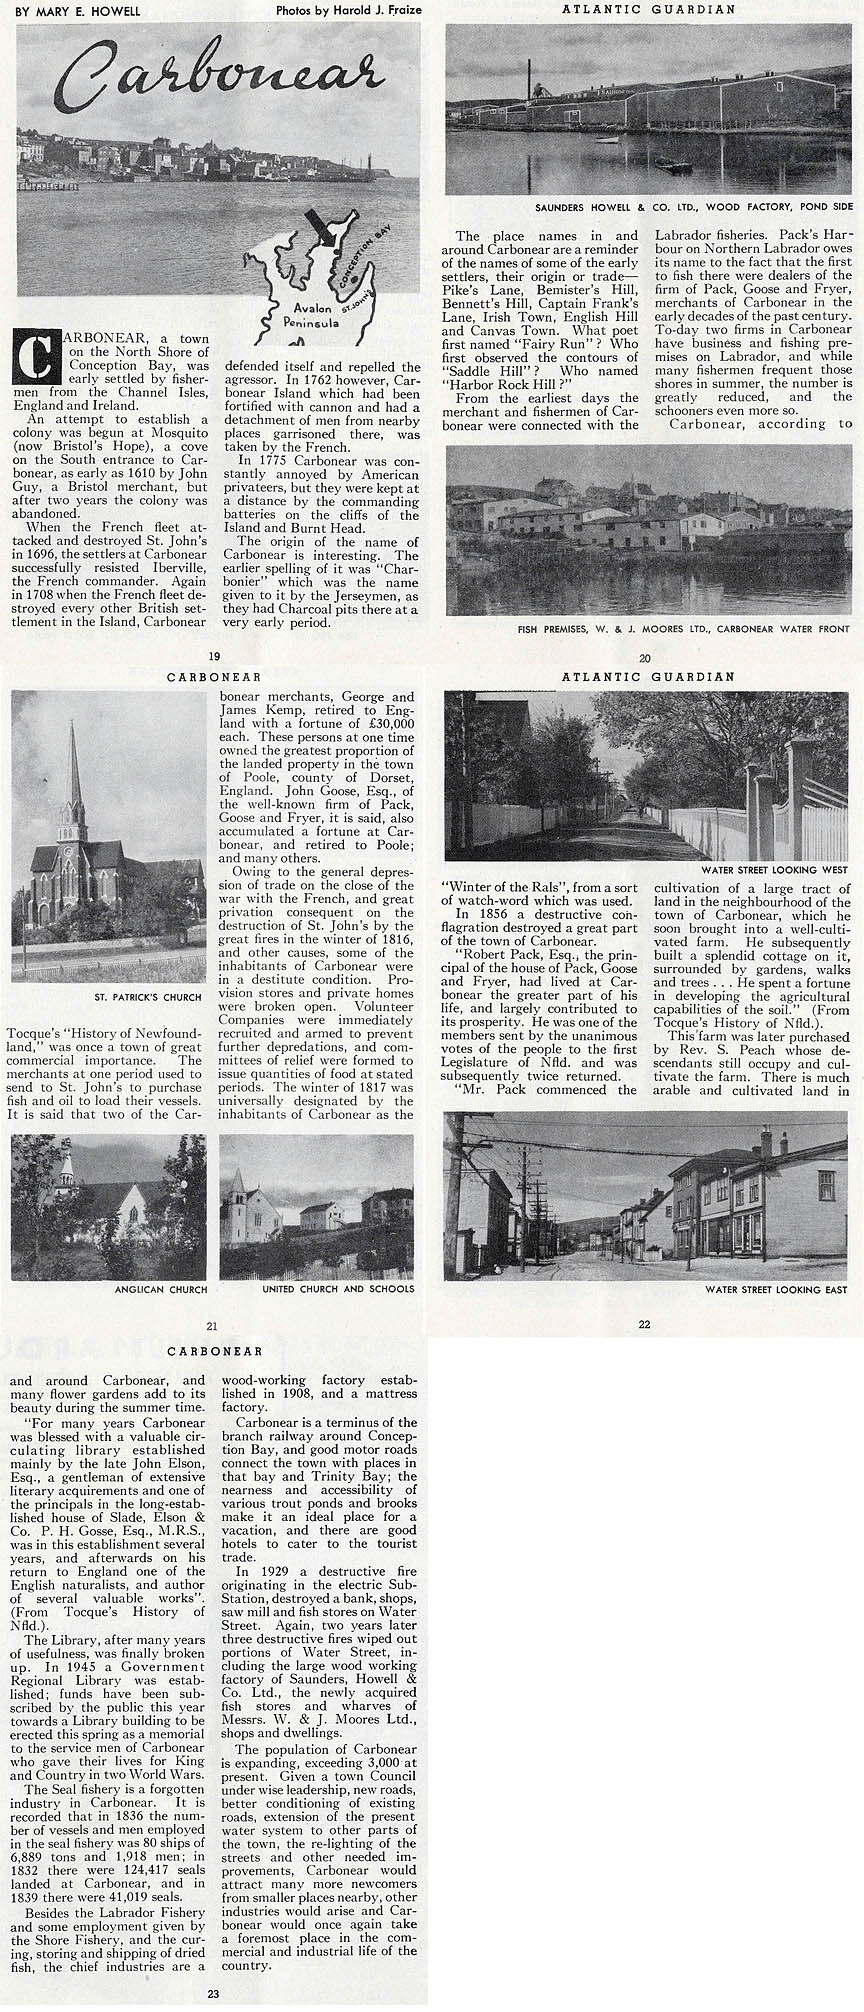 Carbonear history article from 1947 Atlantic Guardian Magazine